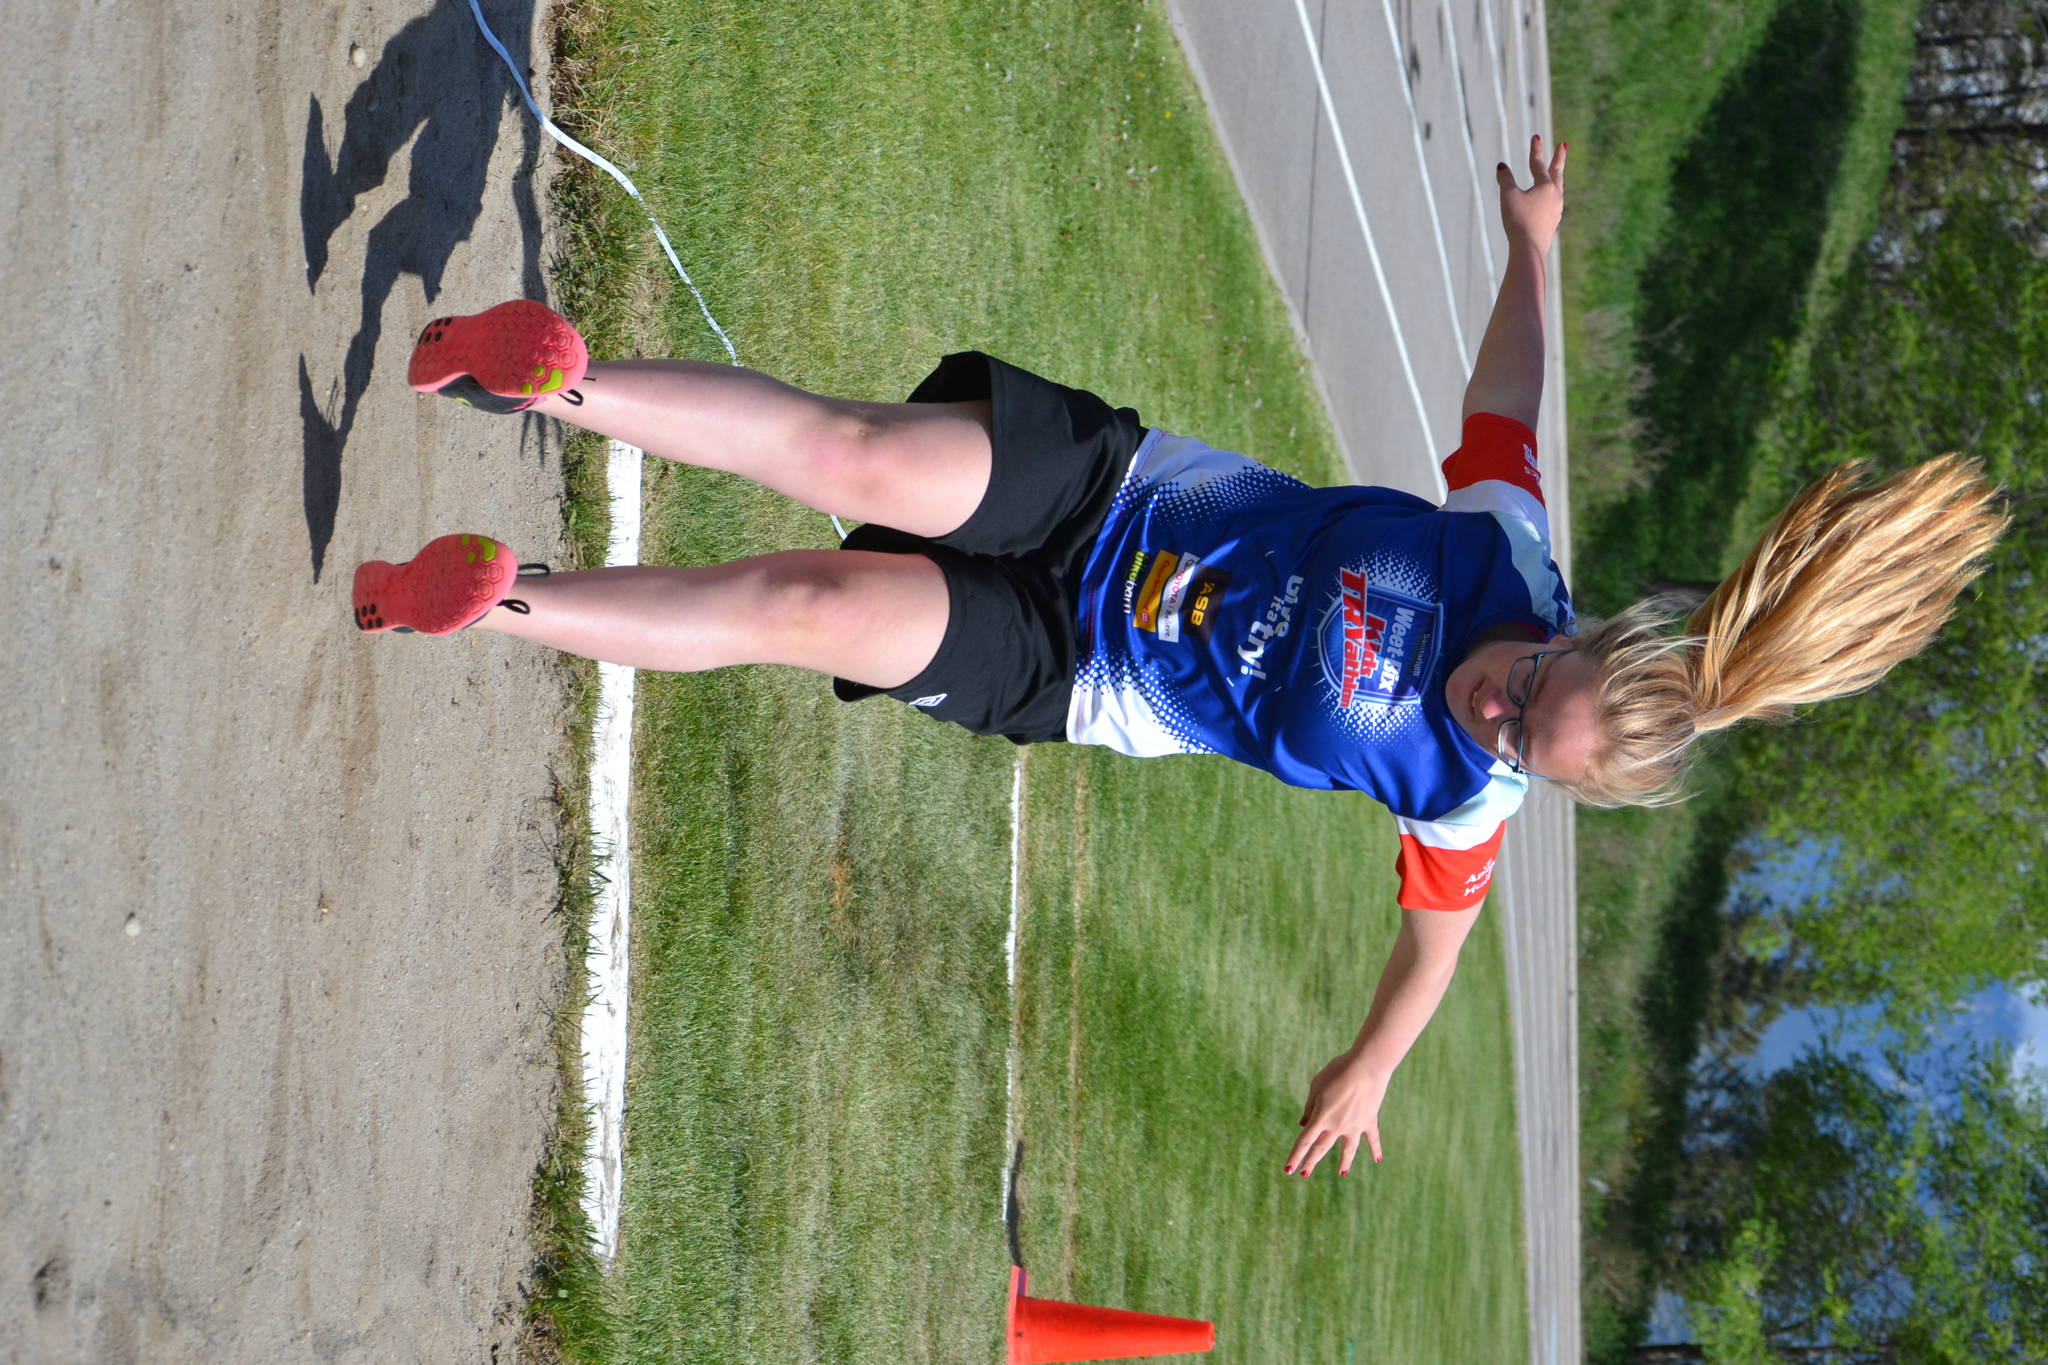 Track and Field Fun for WES students